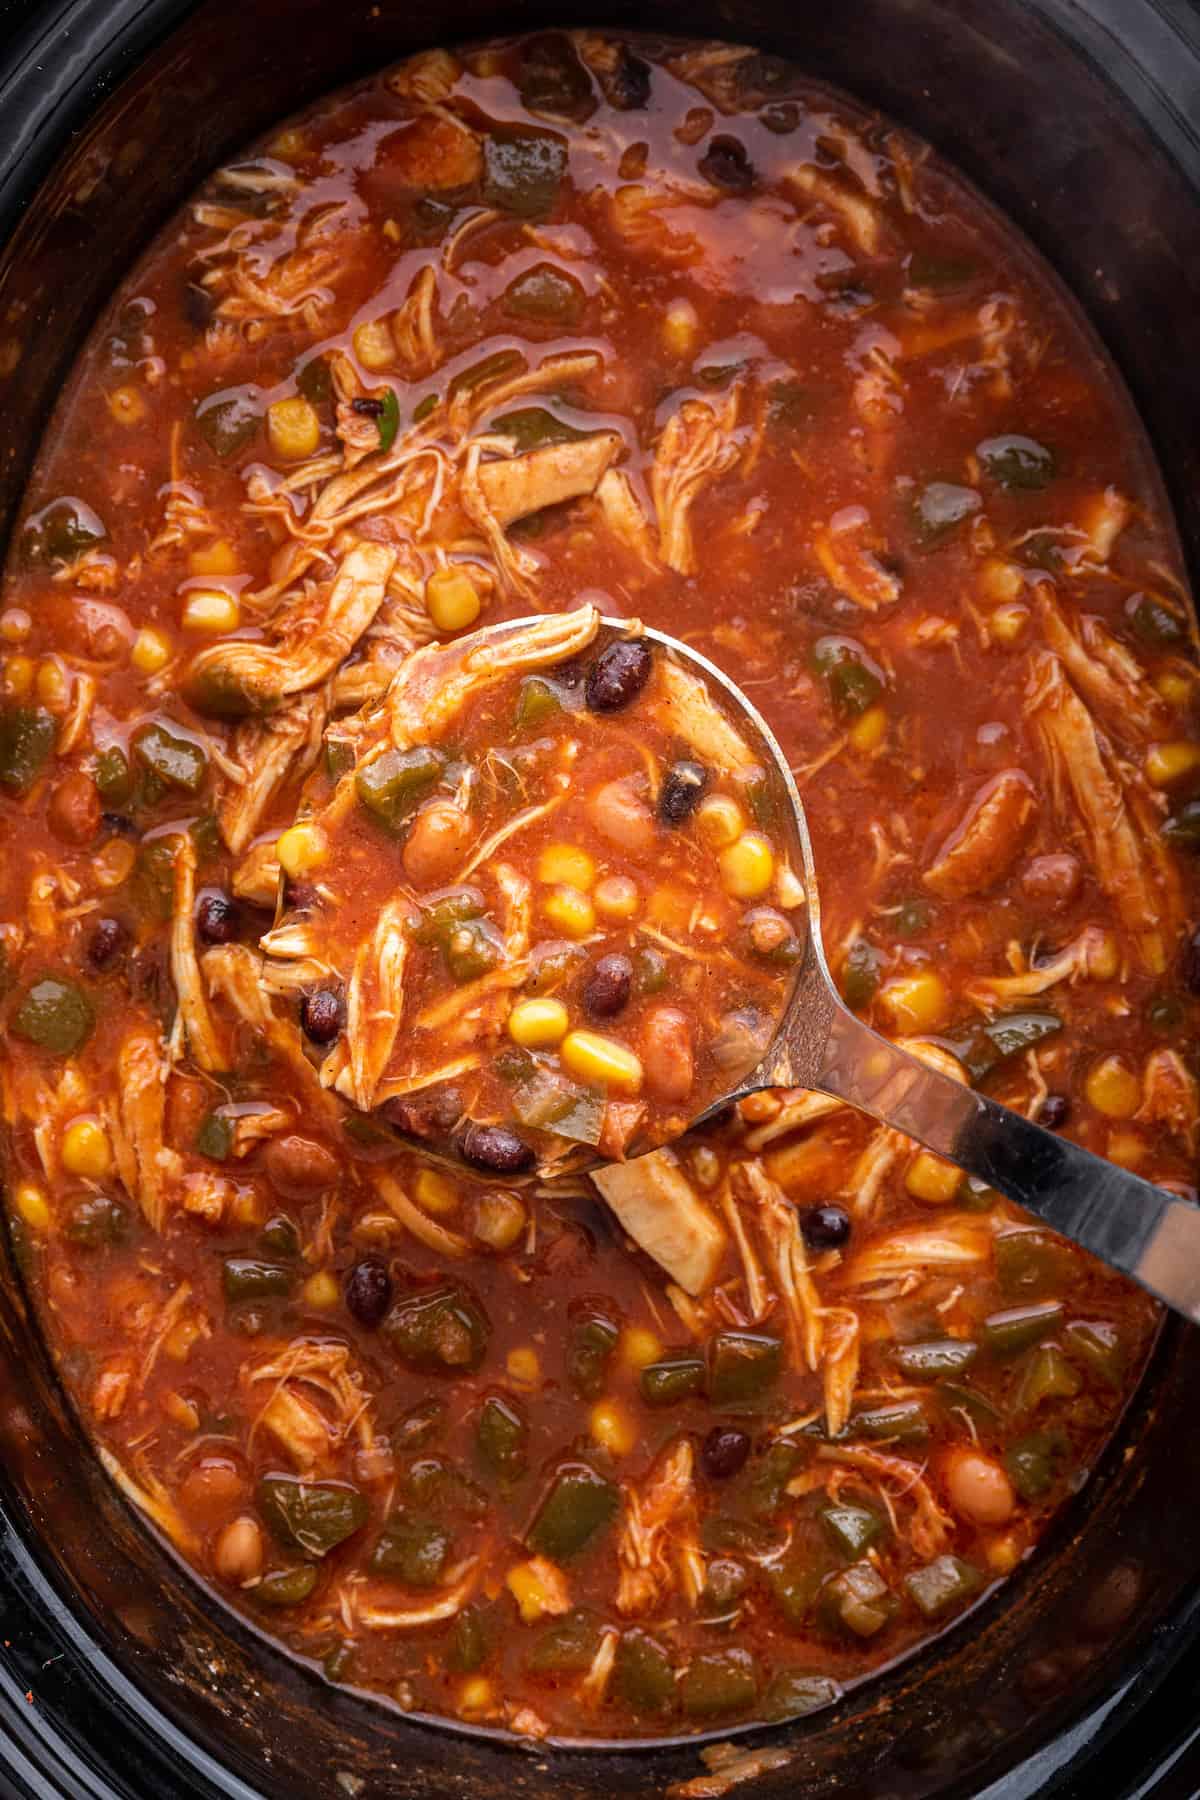 Ladleful of chicken taco soup held over slow cooker